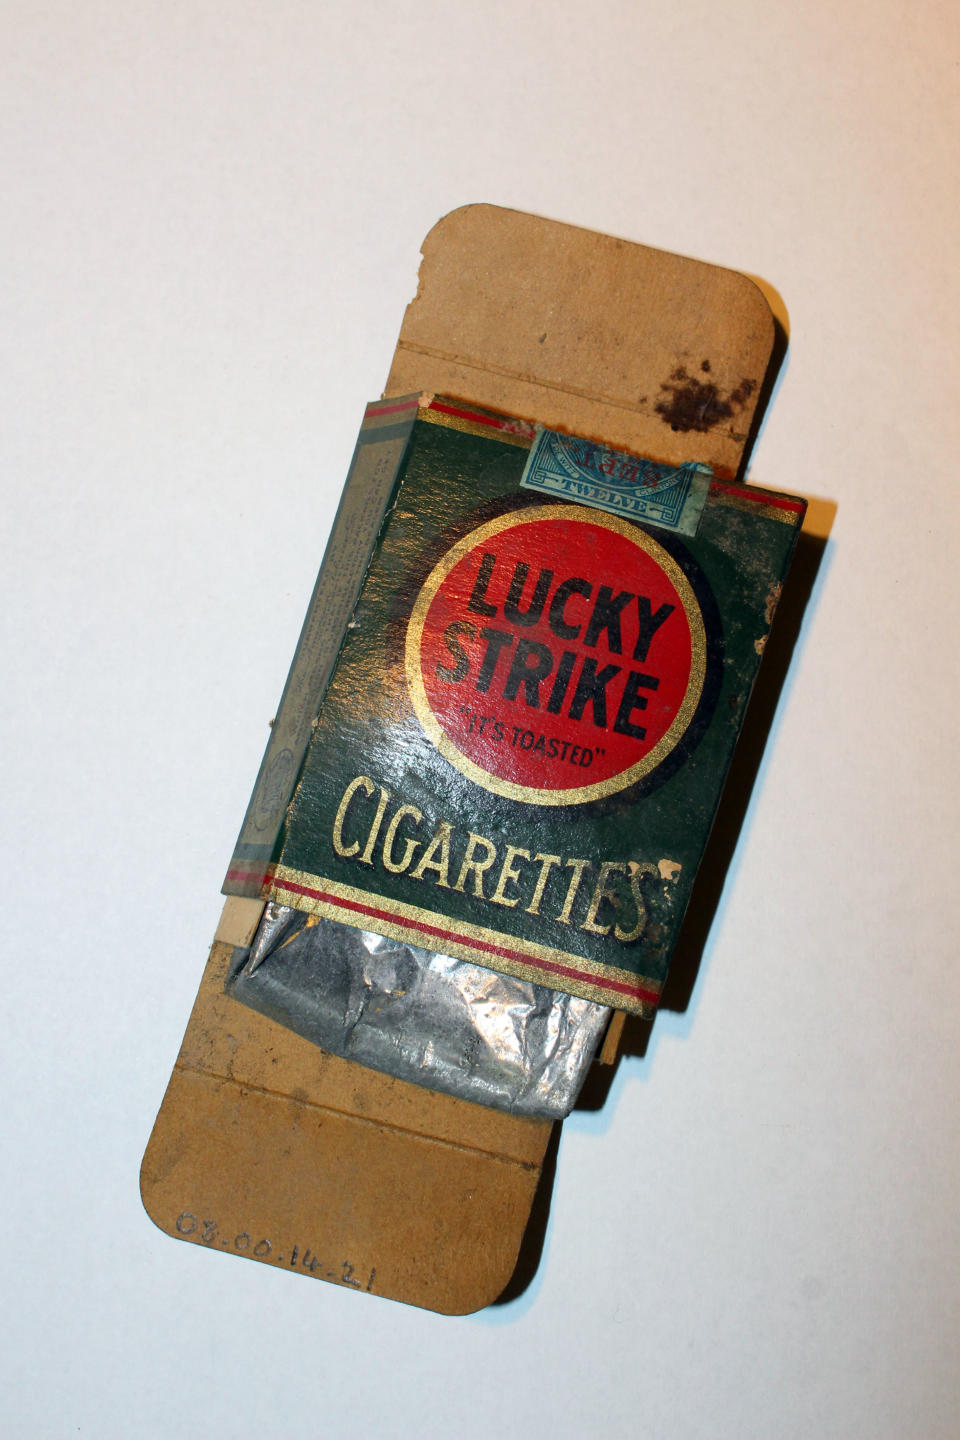 <p>This Lucky Strike package was found under floorboards of an apartment kitchen in 2008. (Photo: Caters News) </p>